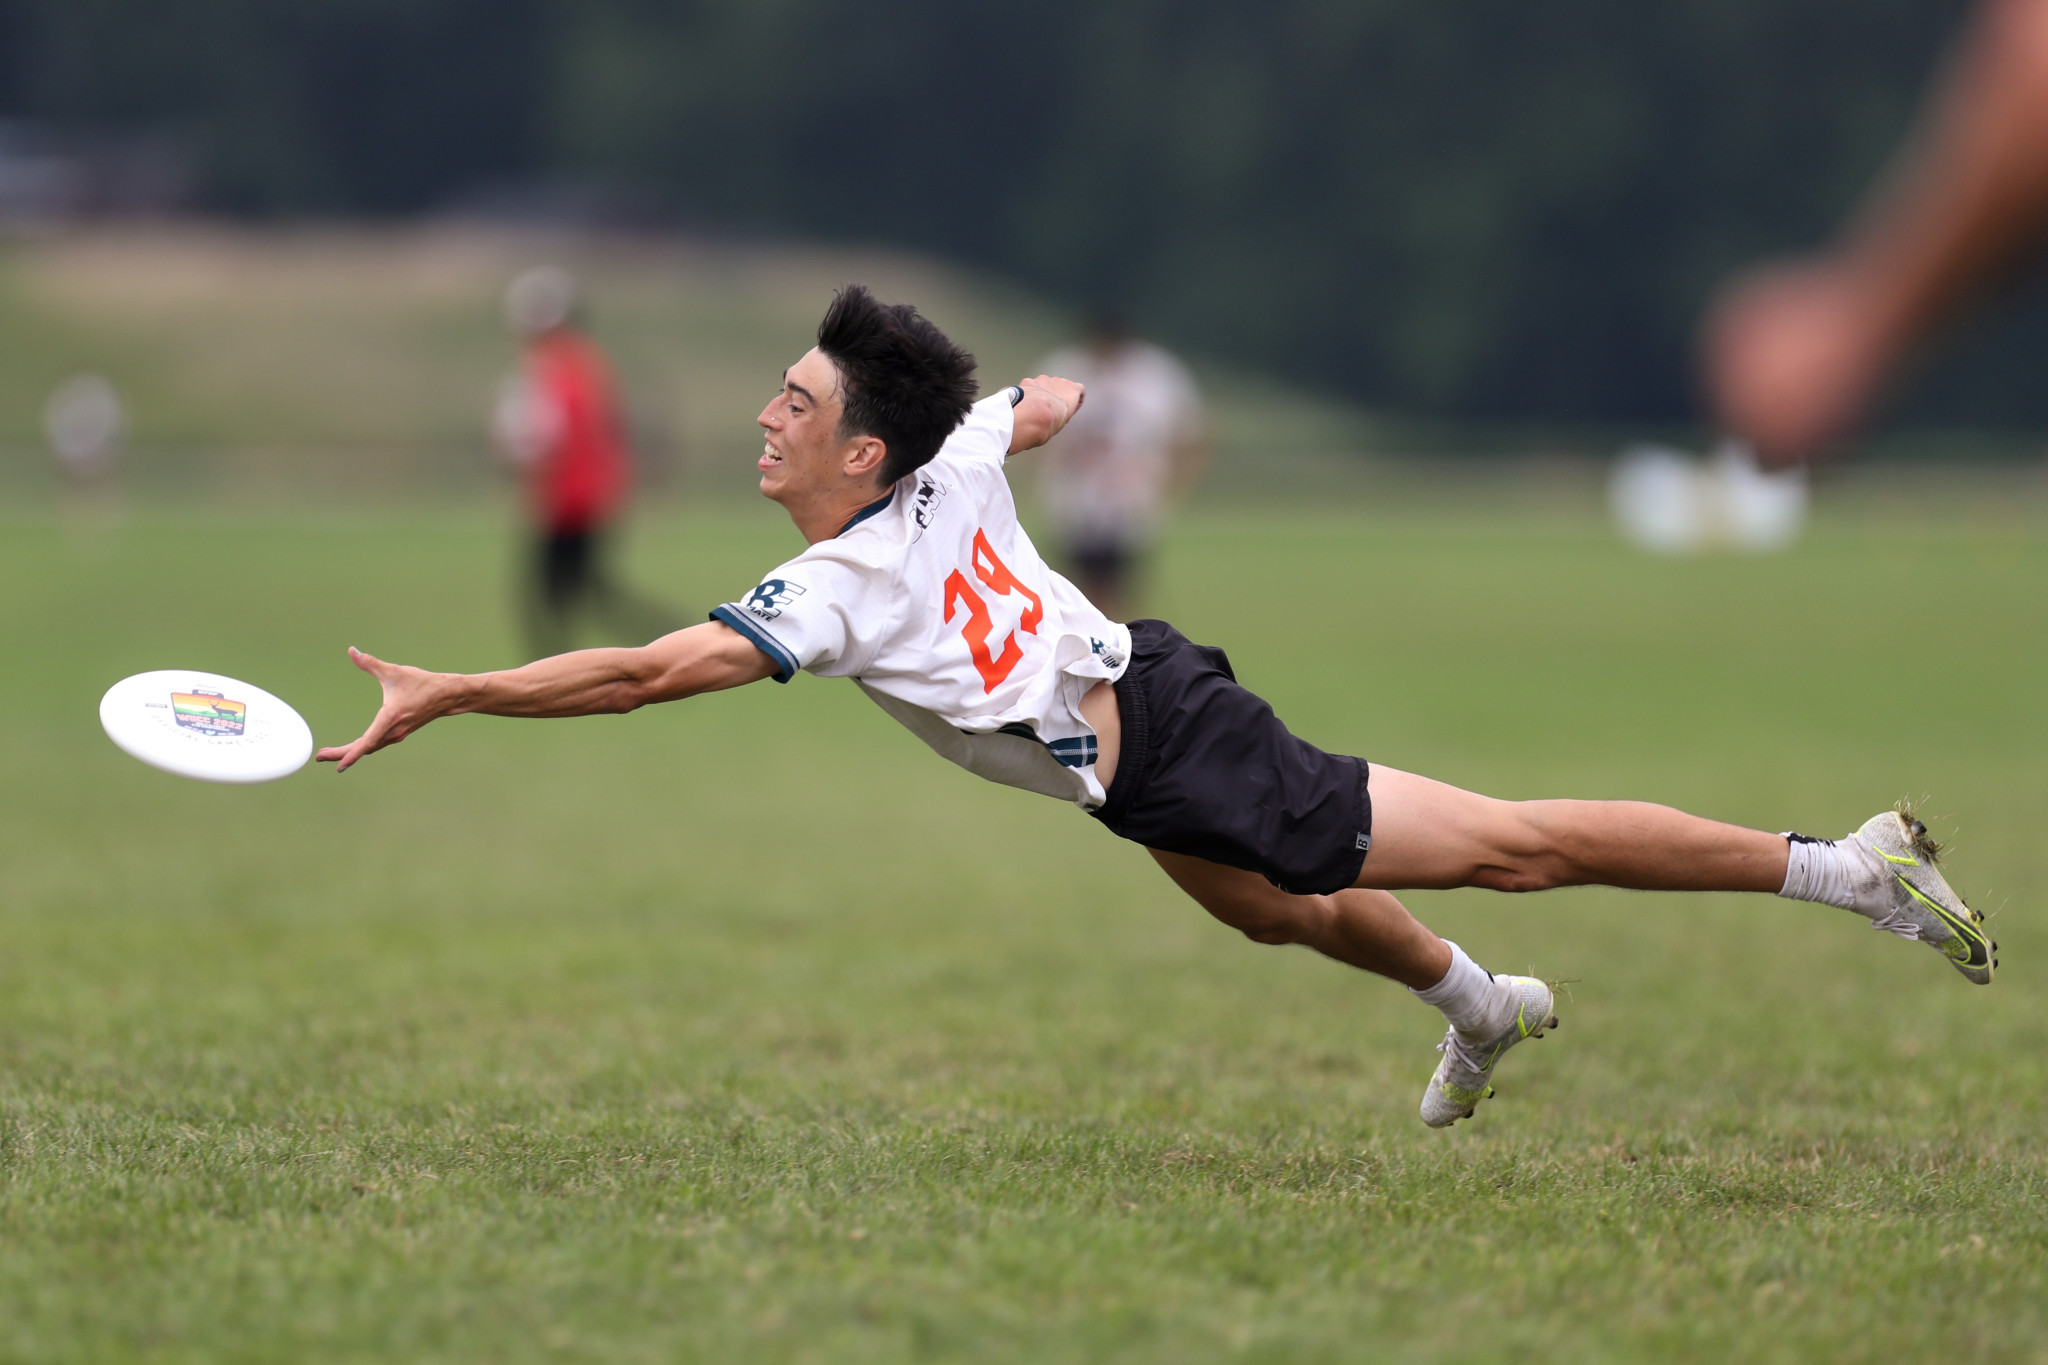 Ultimate players regularly put their bodies on the line for their team to ensure they either force turnovers or prevent losing possession ©Paul Rutherford for UltiPhotos